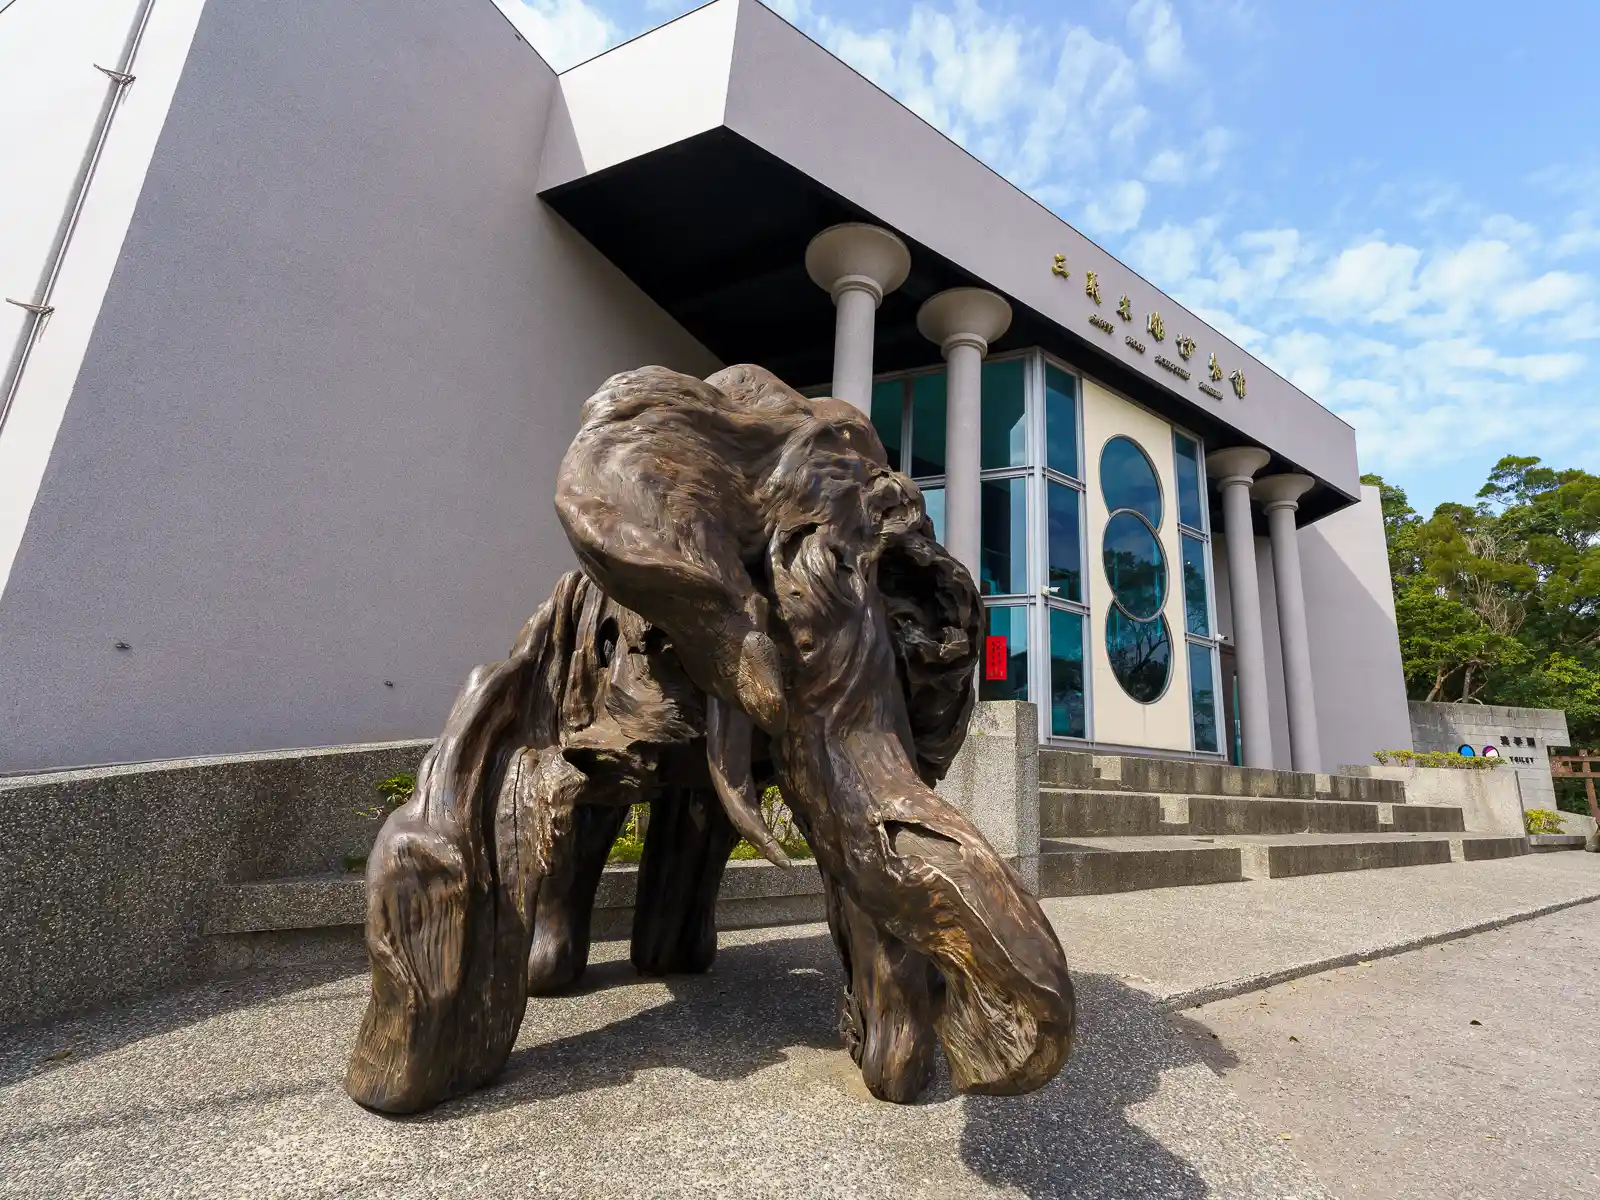 A large wood carving of an elephant stands at the entrance to the museum.